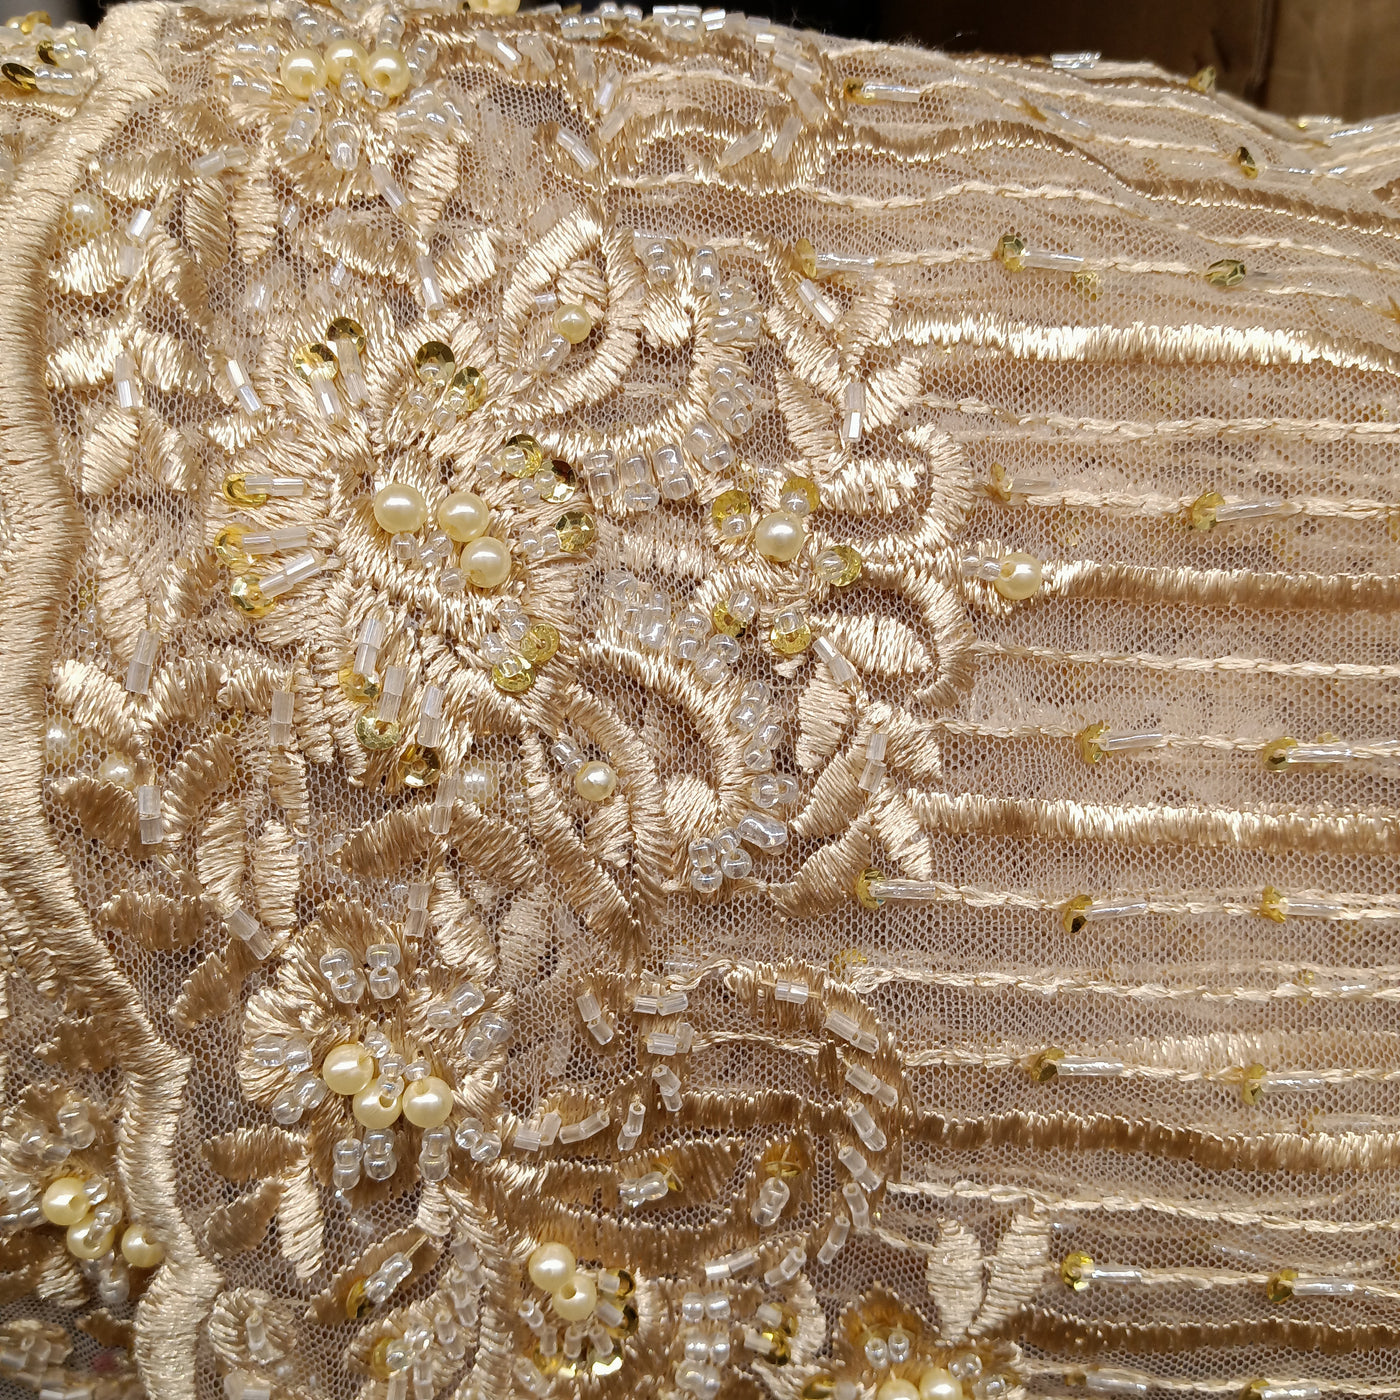 Embroidered & Beautifully Beaded Peach Net Fabric with Beads. Lace Usa